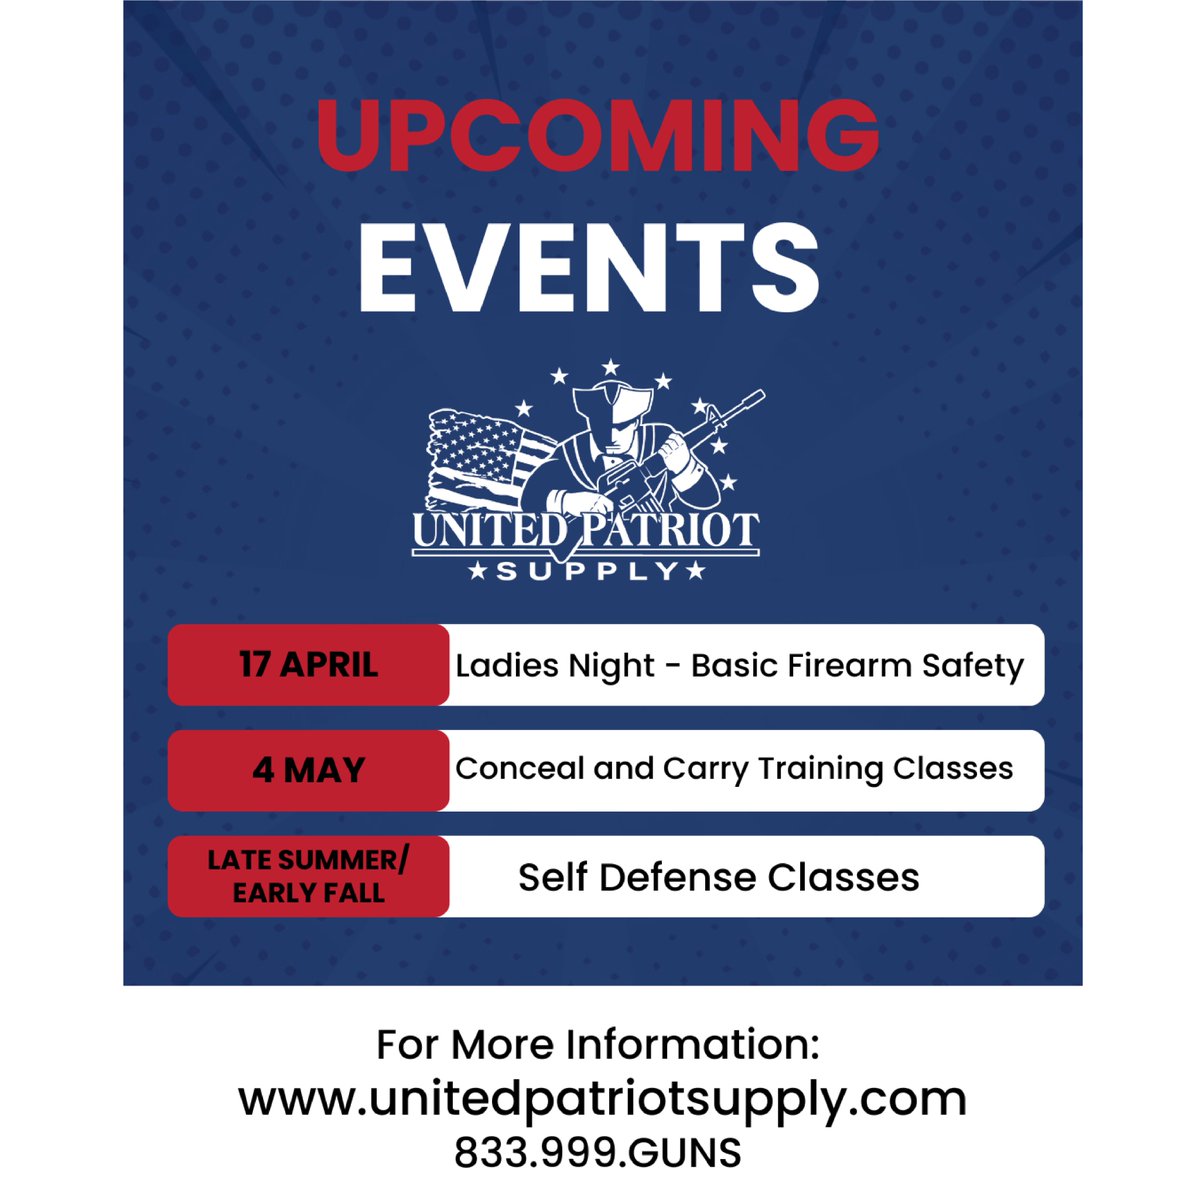 Stay tuned for upcoming classes and events at United Patriot Supply! #educateyourself #beprepared #SelfDefense #freedom #concealcarry #guns #firearms #defendthesecond #ammo